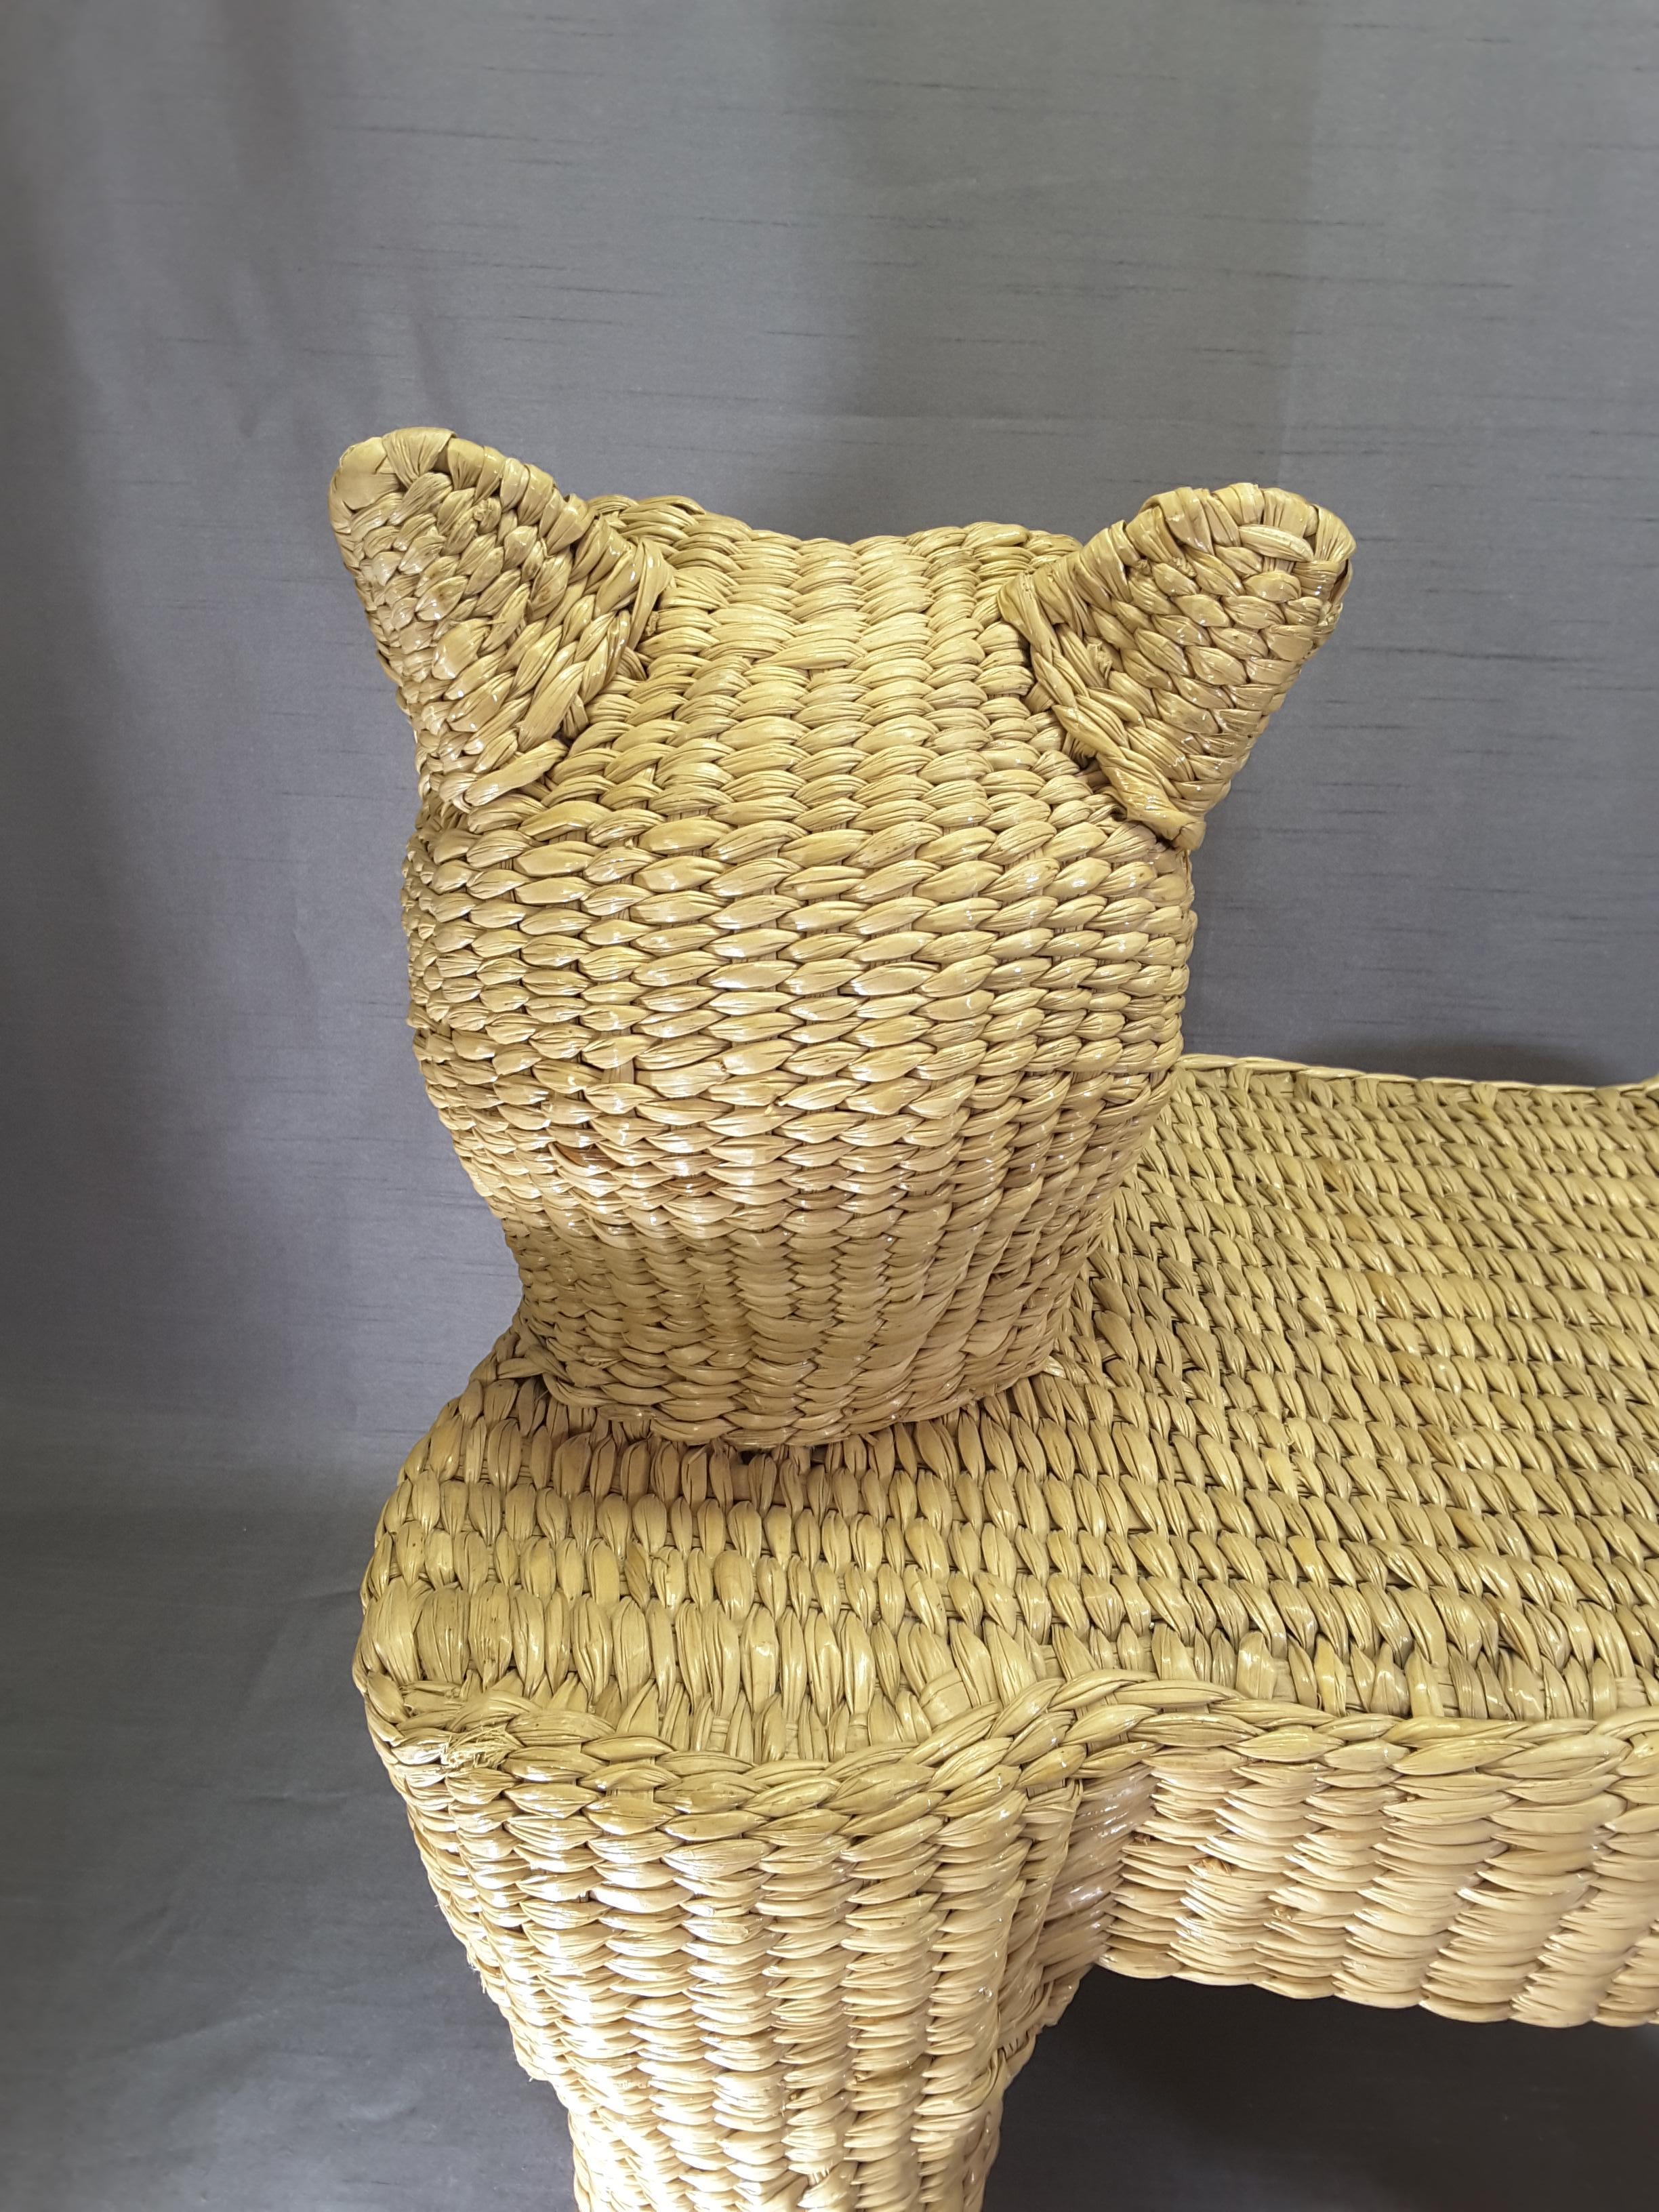 Mario Lopez Torres Wicker Panther Stool, Early 1970s For Sale 1